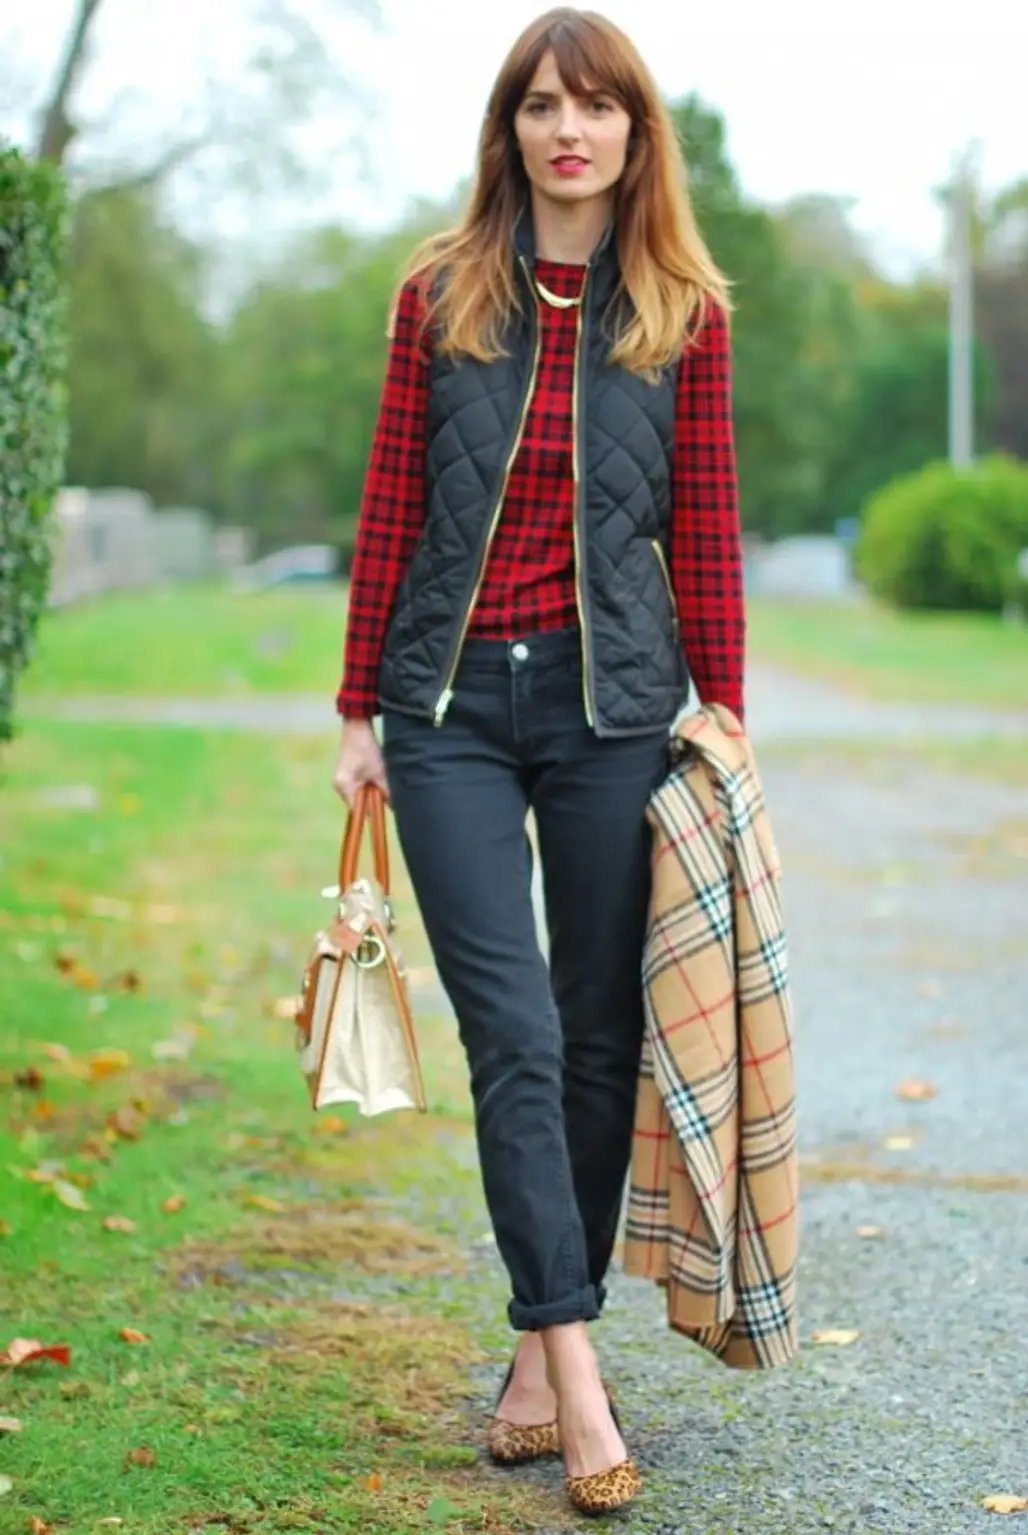 Streetstyle Ways to Wear Leopard with Plaid